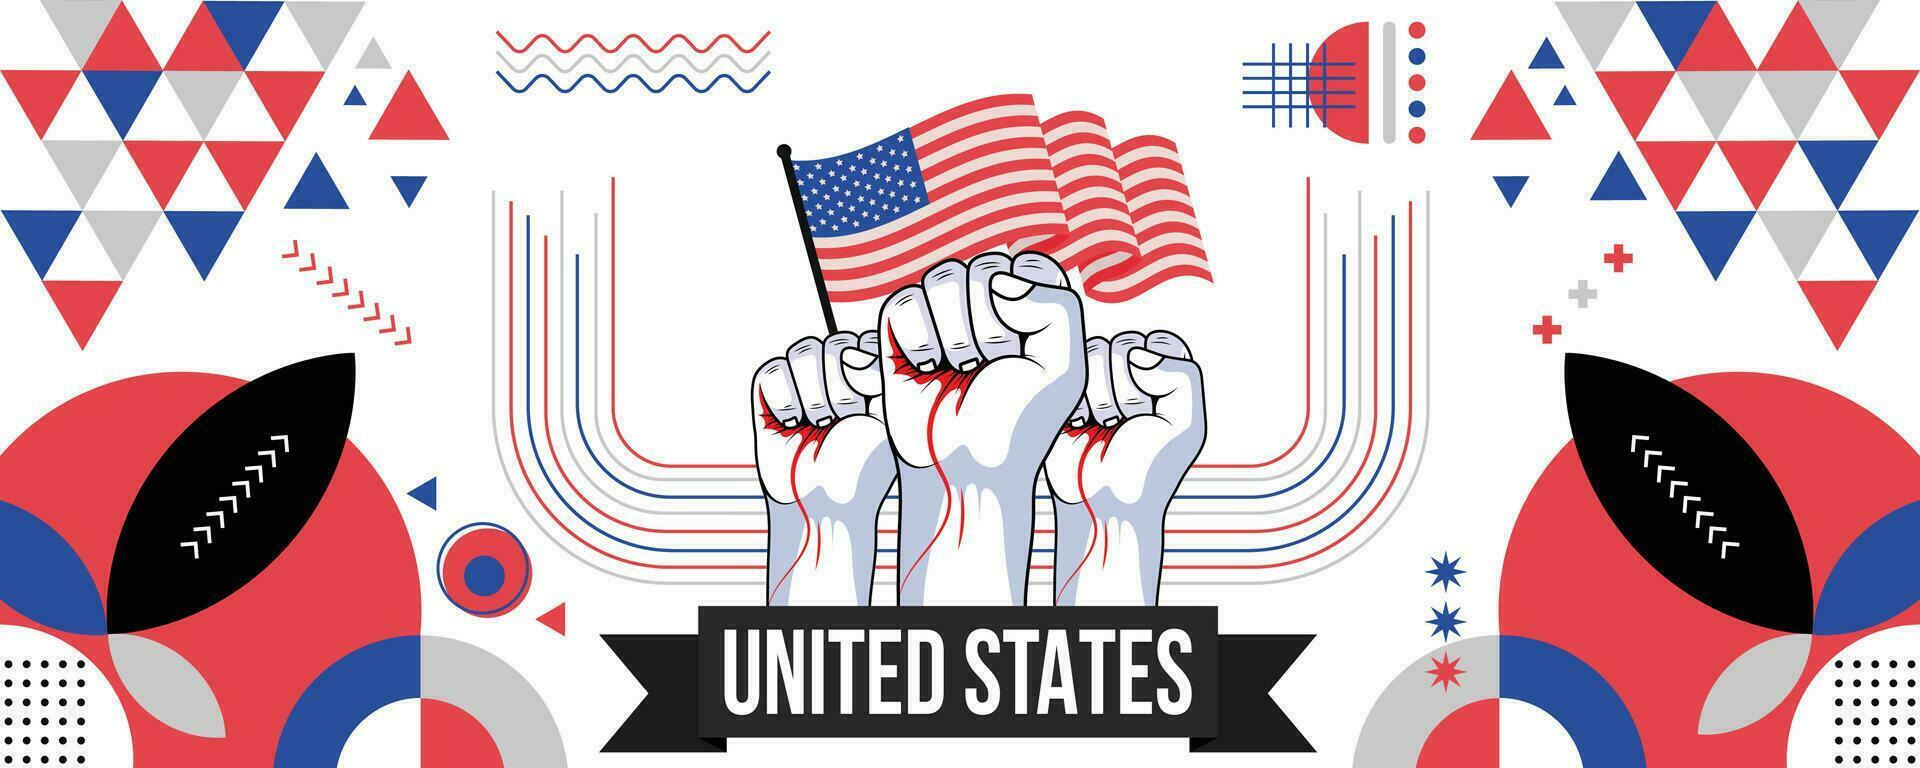 USA national or independence day banner for country celebration. Flag of United states with raised fists. Modern retro design with typorgaphy abstract geometric icons. Vector illustration.